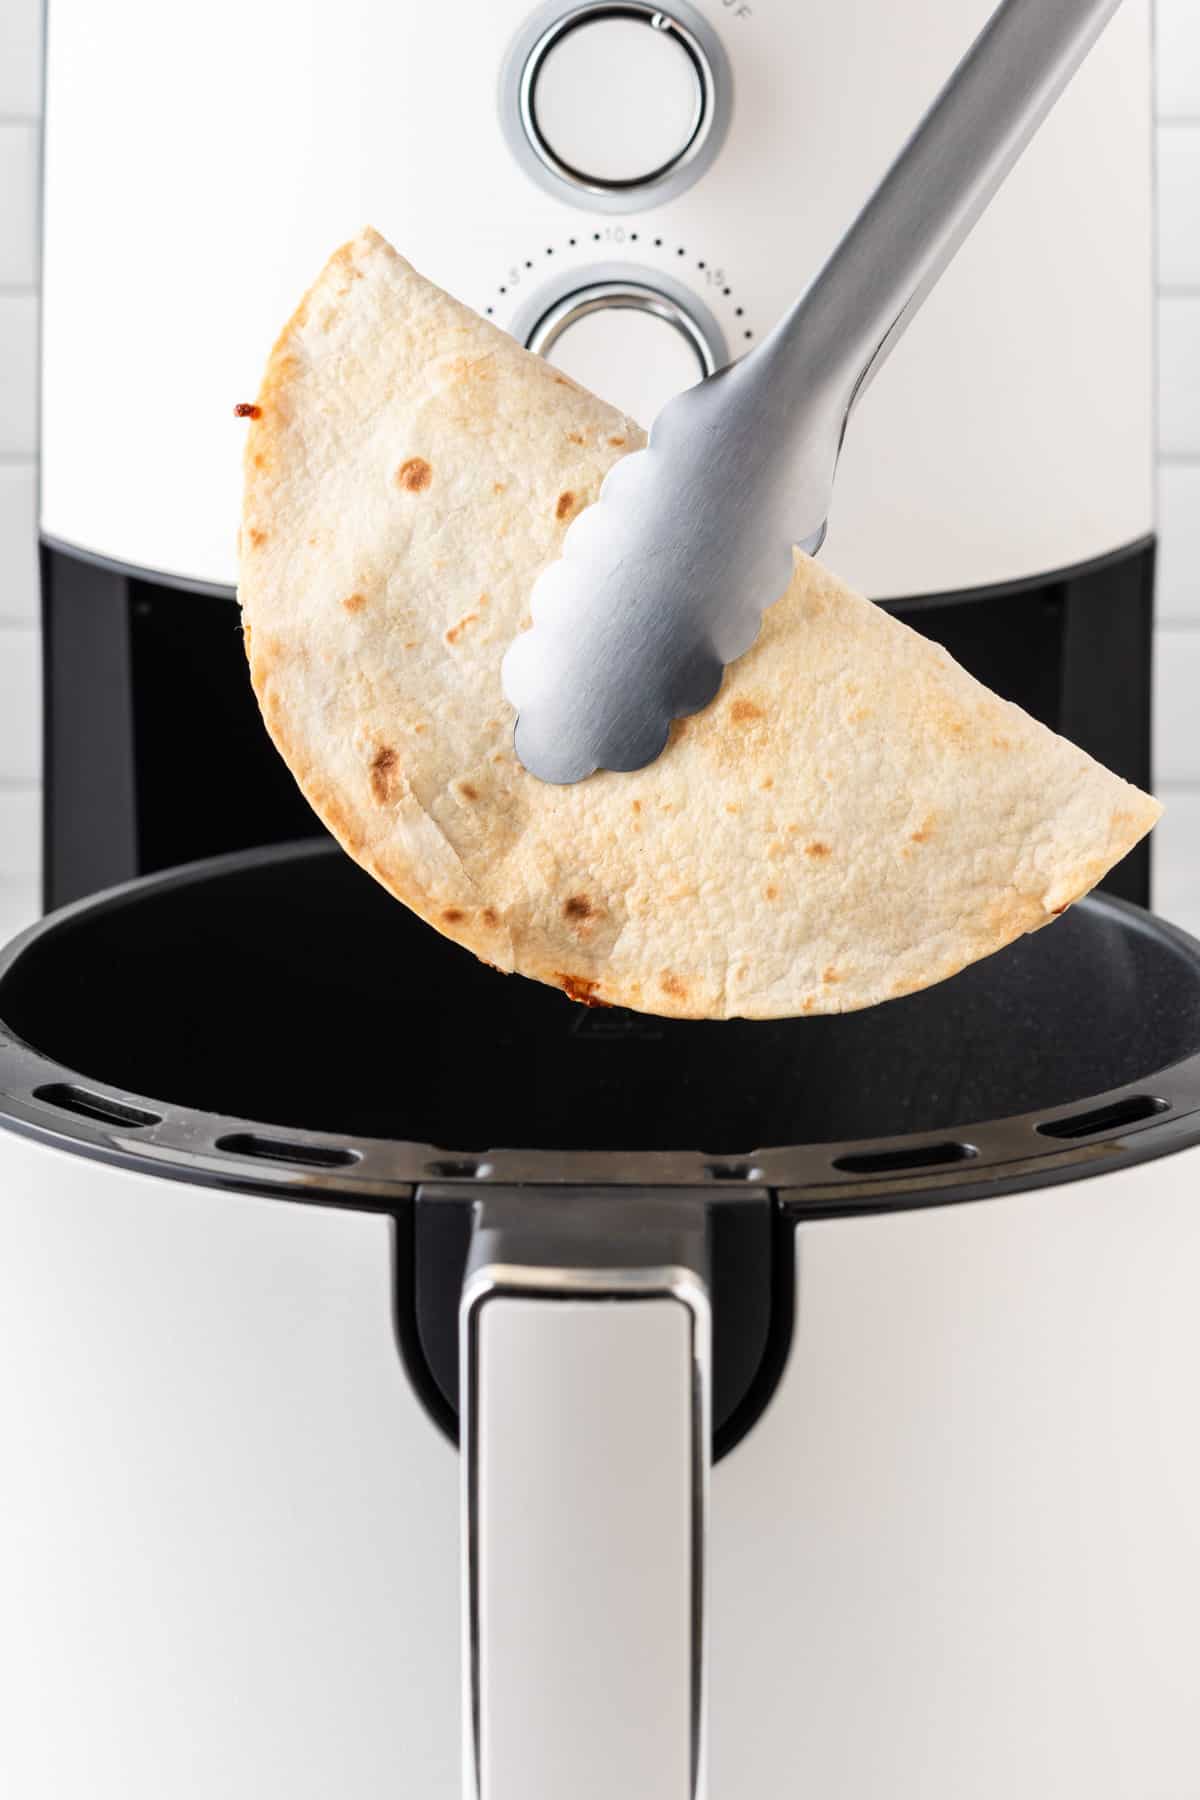 tongs removing the quesadilla from the air fryer